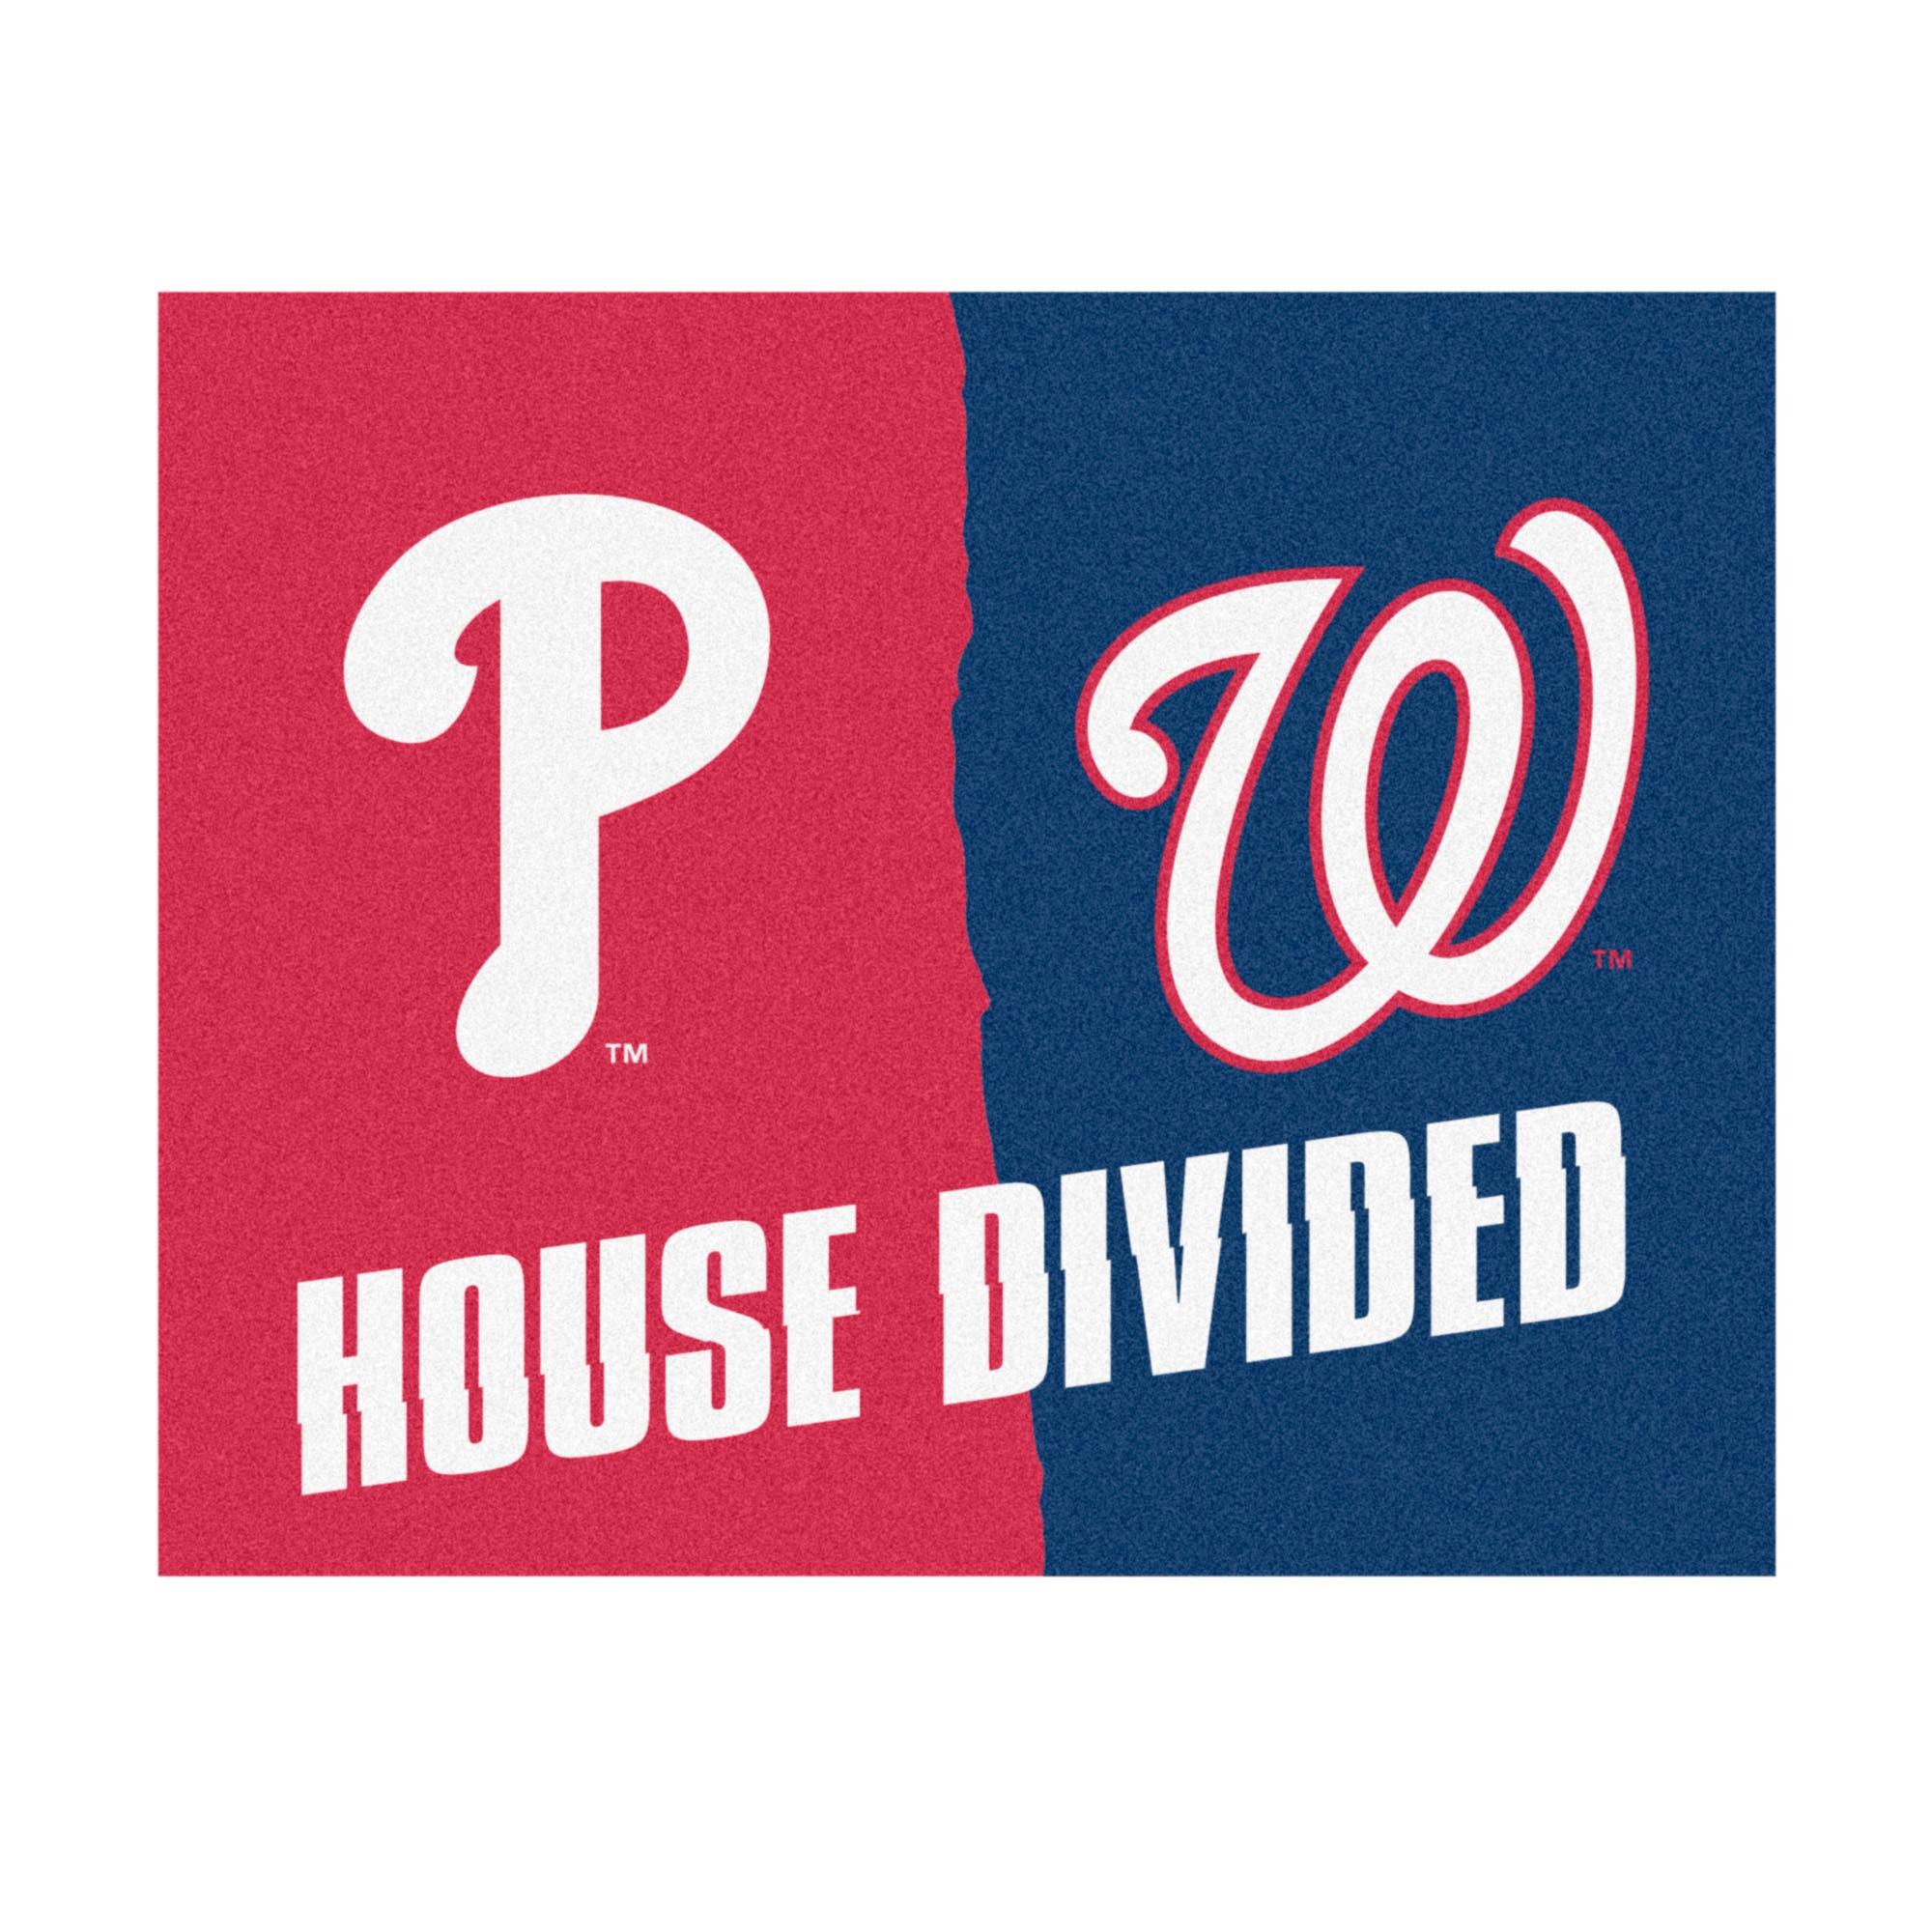 FANMATS, MLB House Divided - Phillies / Nationals House Divided Rug